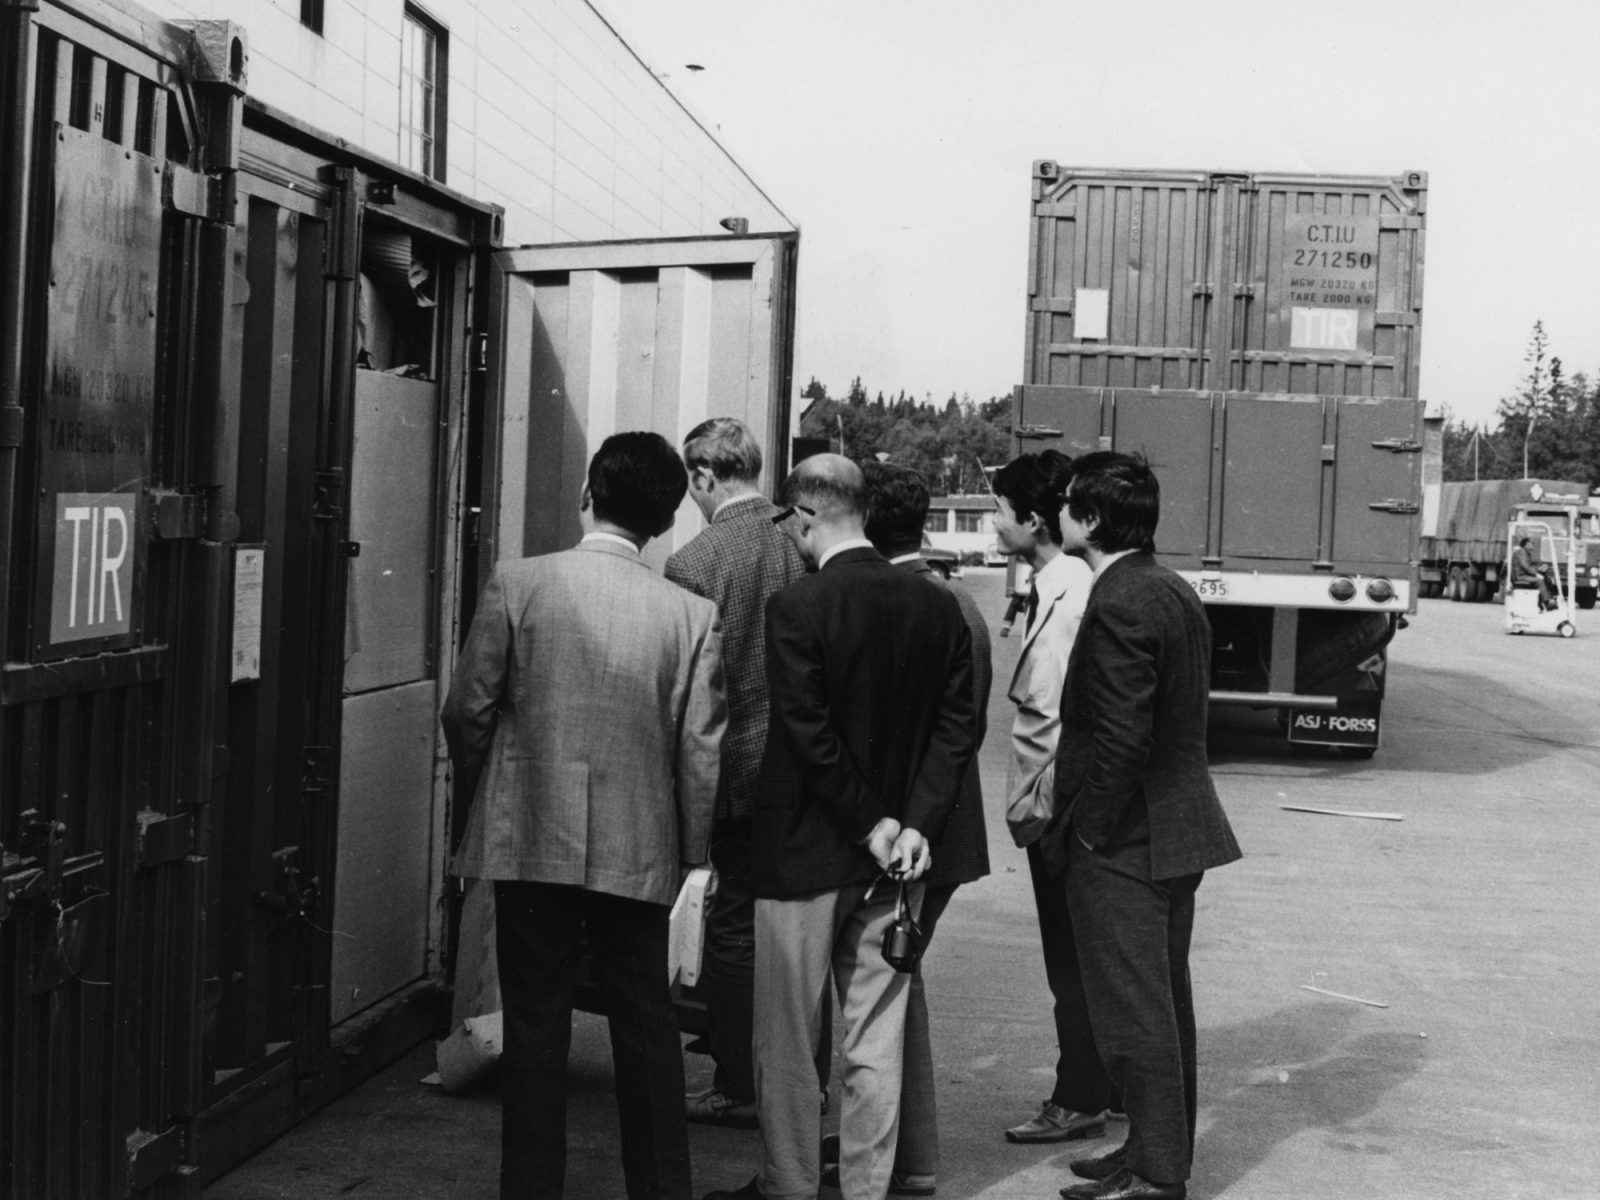 A group of men in suits standing in an industrial area, peeking into a container.